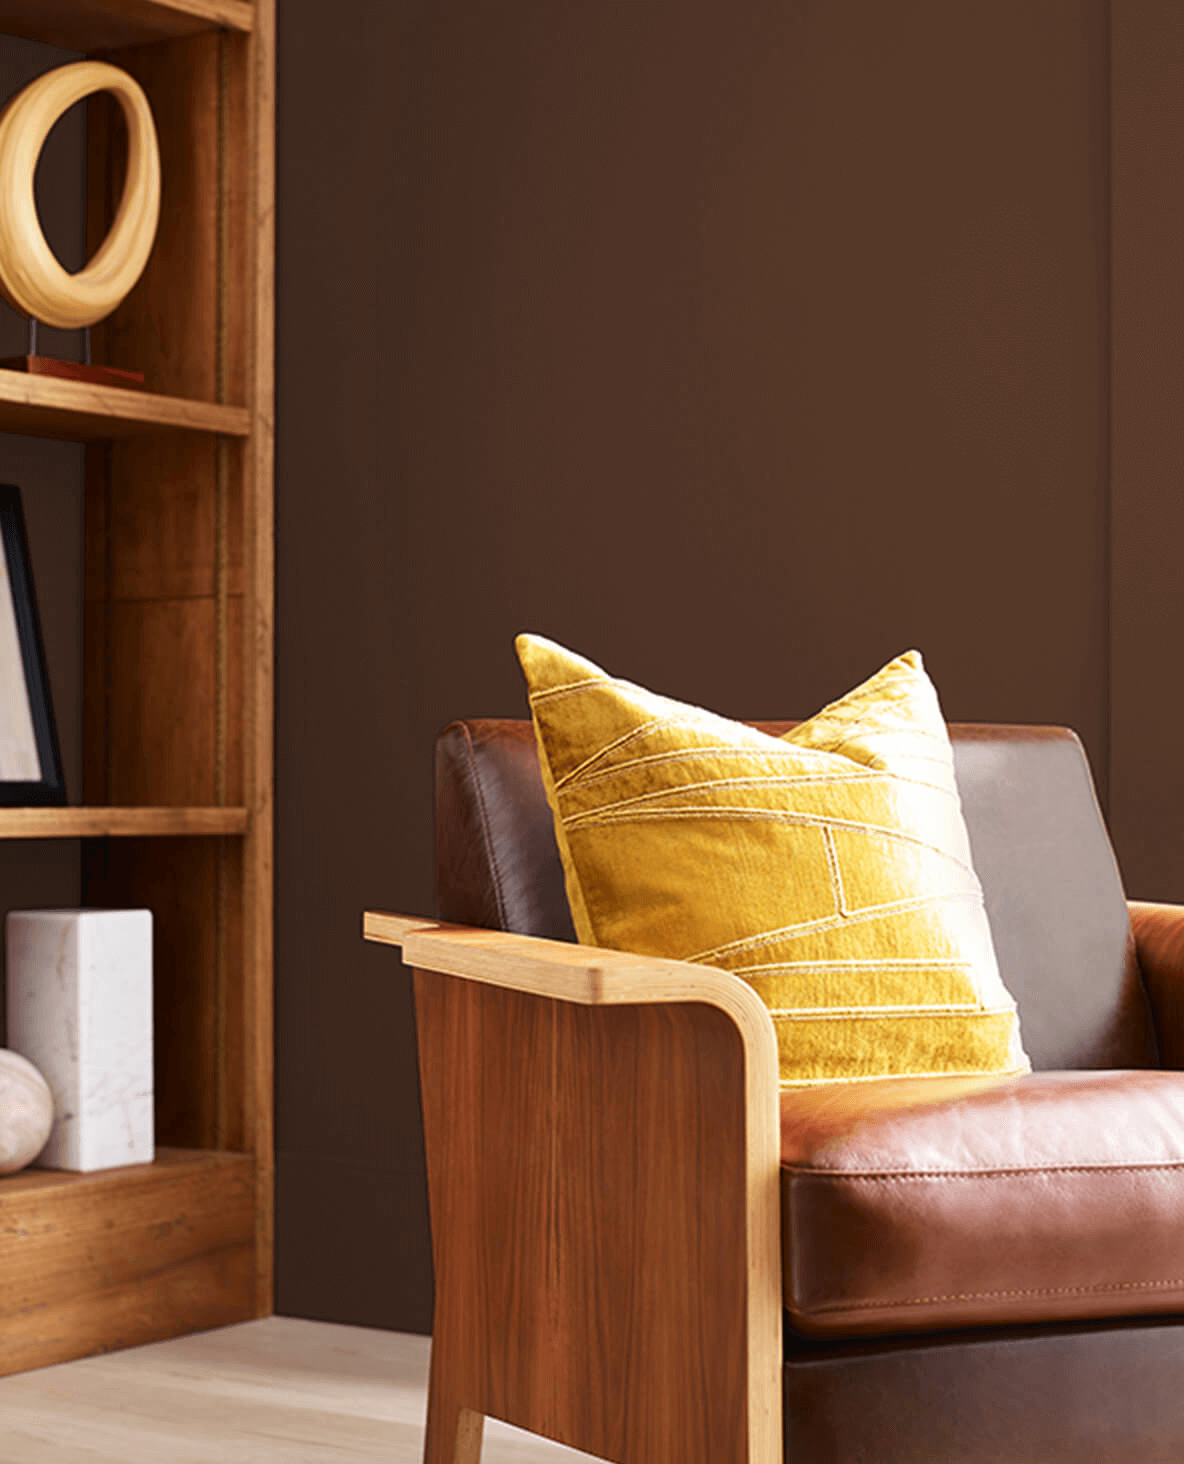 brown leather chair against a rich brown wall.